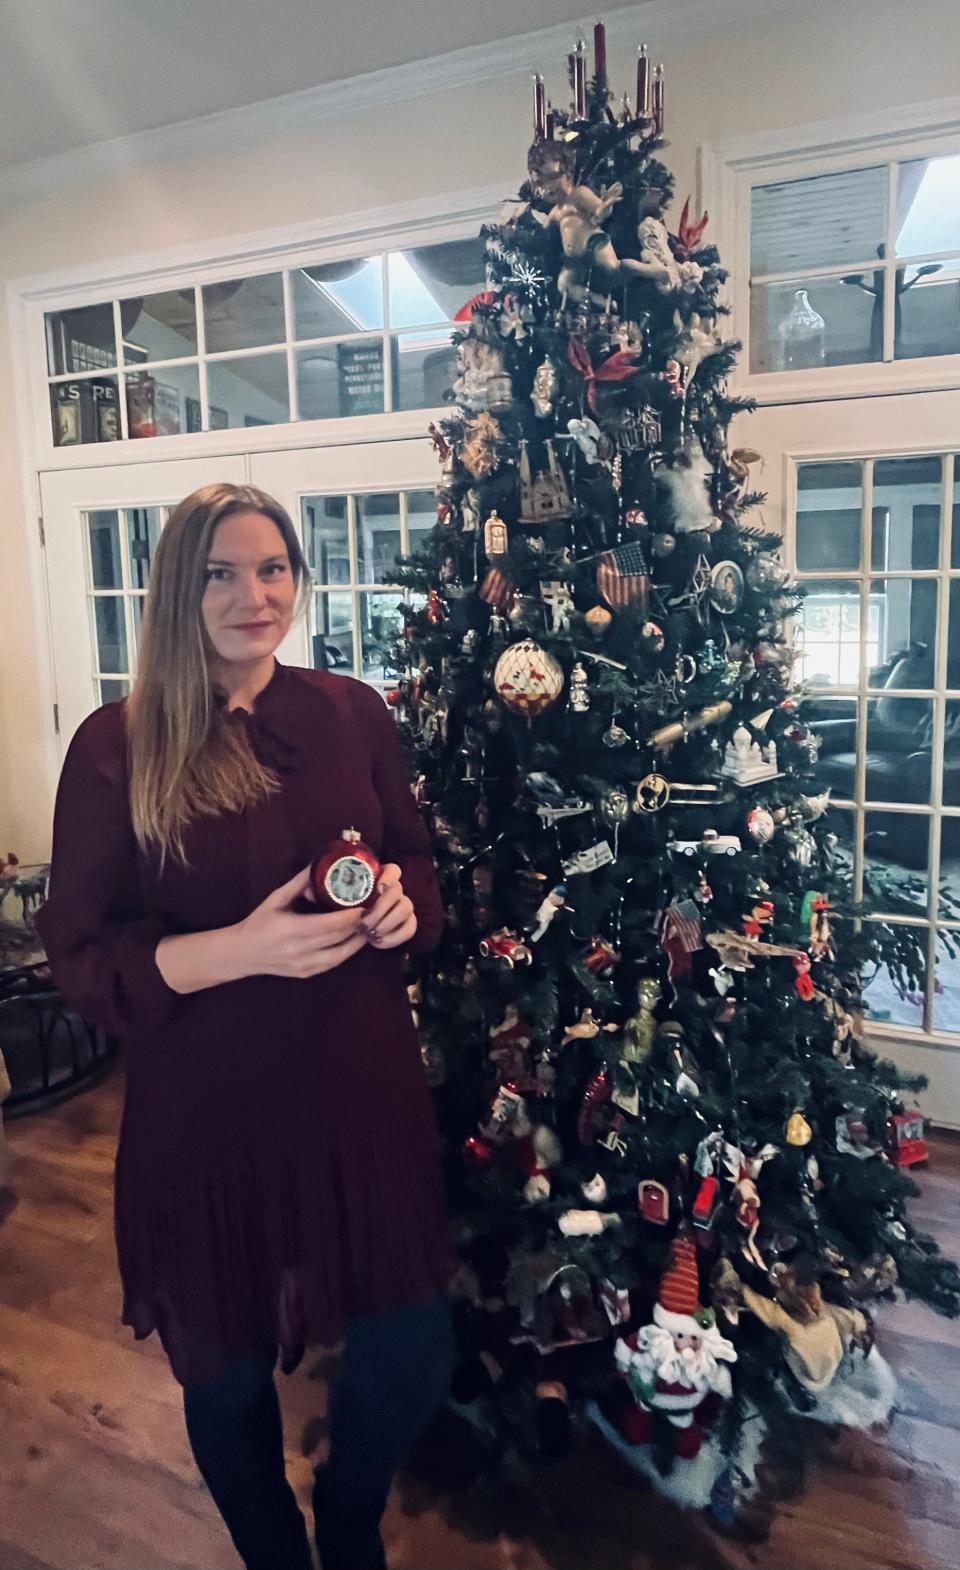 “You don’t realize how much you’re going to miss someone's voice until you can't hear it anymore,” said Savannah Kelly, owner of Holiday Voices, which creates voice-recordable Christmas ornaments. For the second year, she’s made donations of the ornaments to a southeast Georgia hospice for families to capture messages from loved ones.